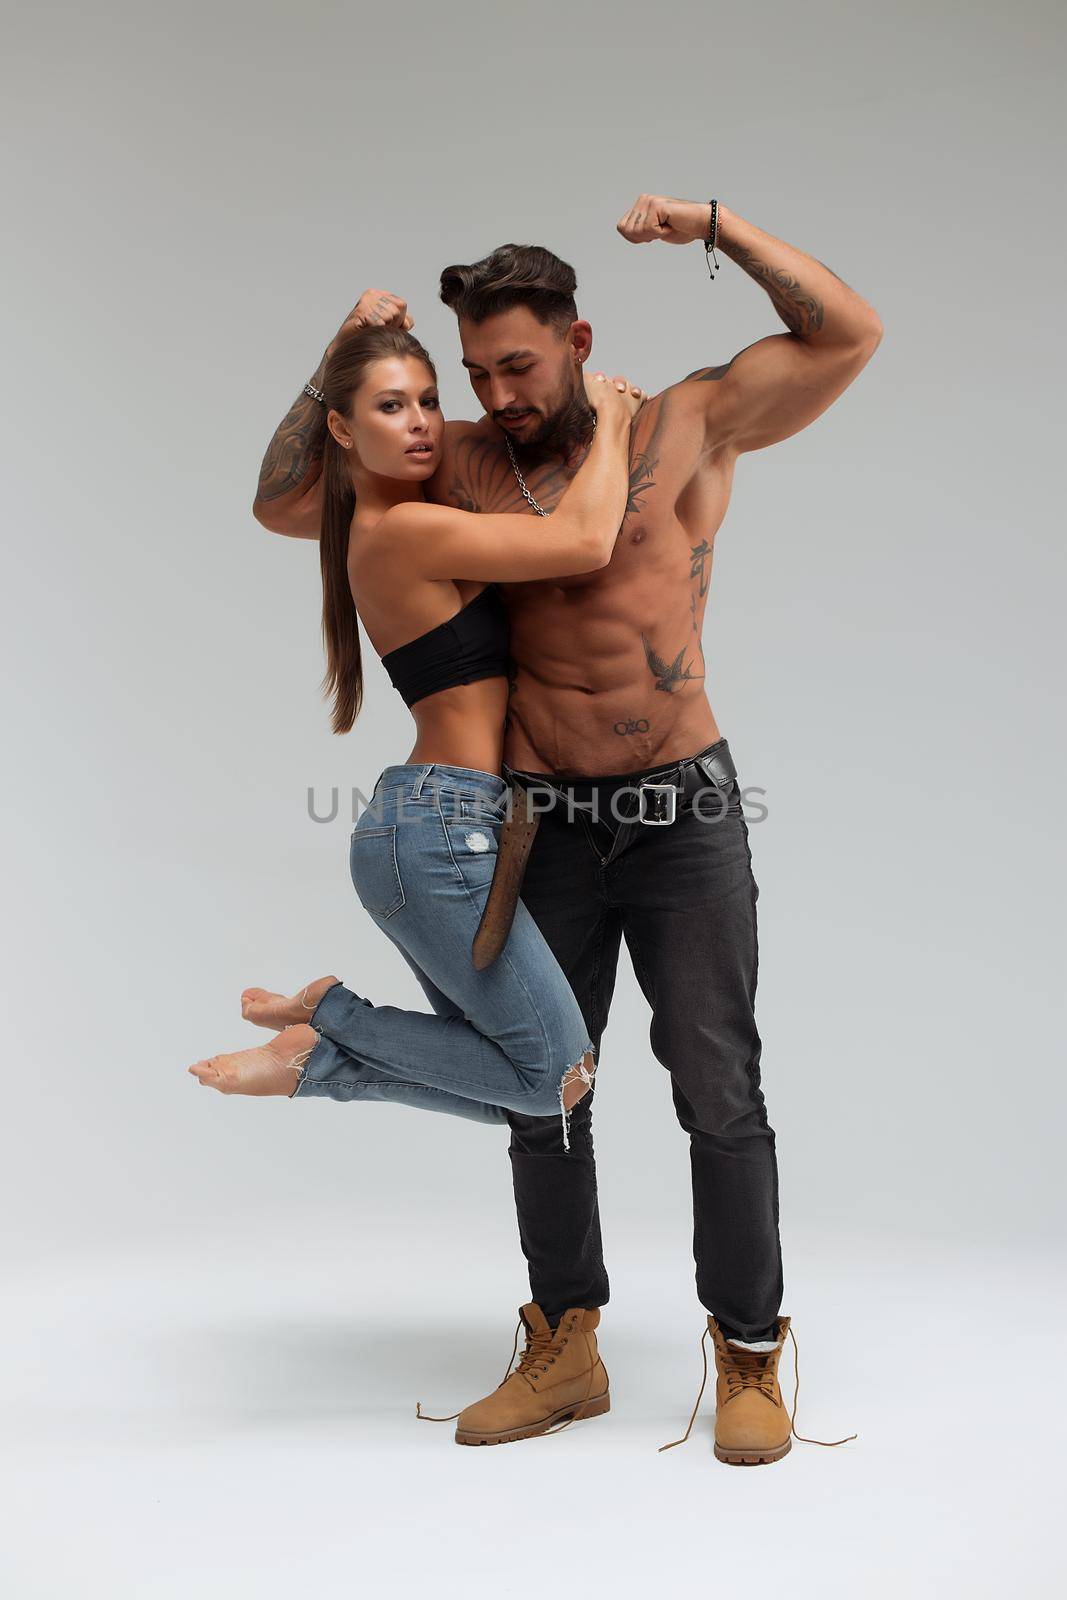 Attractive female embracing handsome shirtless male with tattoos from behind and looking at camera against gray background